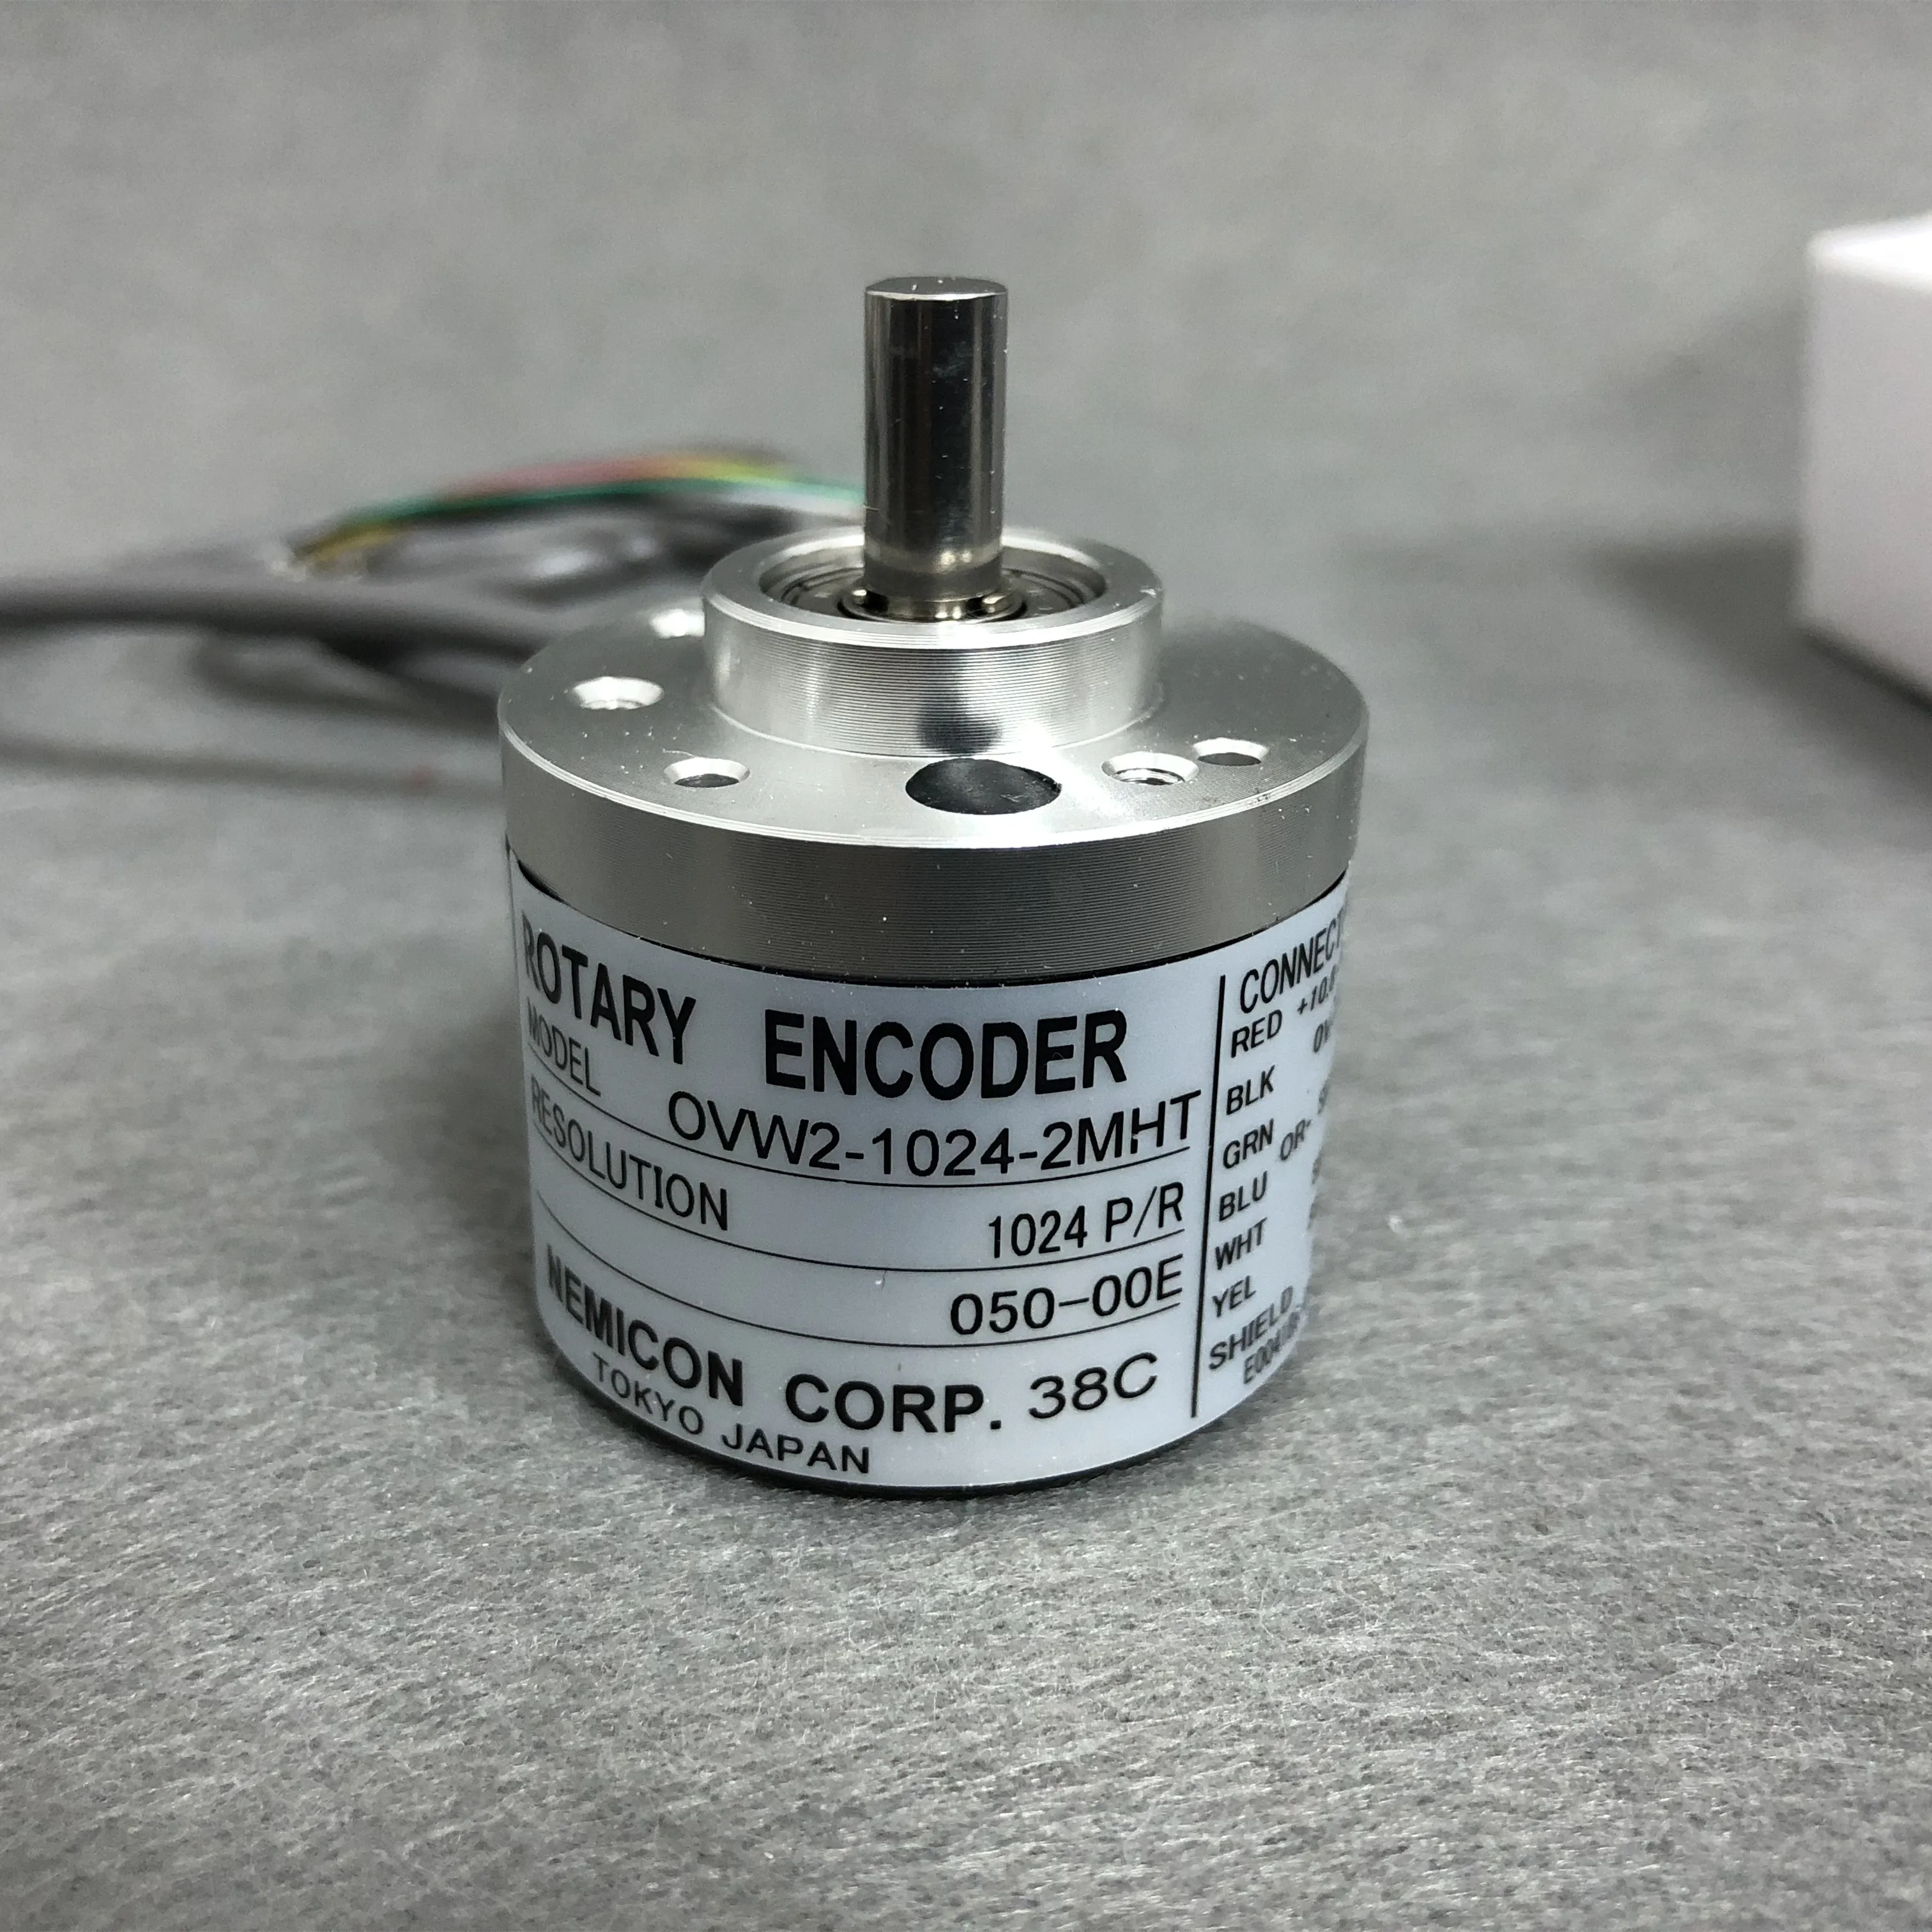 

OVW2 Incremental Photoelectric Rotary Encoder OVW2-06-2MHT-10-2MD-1024-01-05-02-20-25-036-2MHC